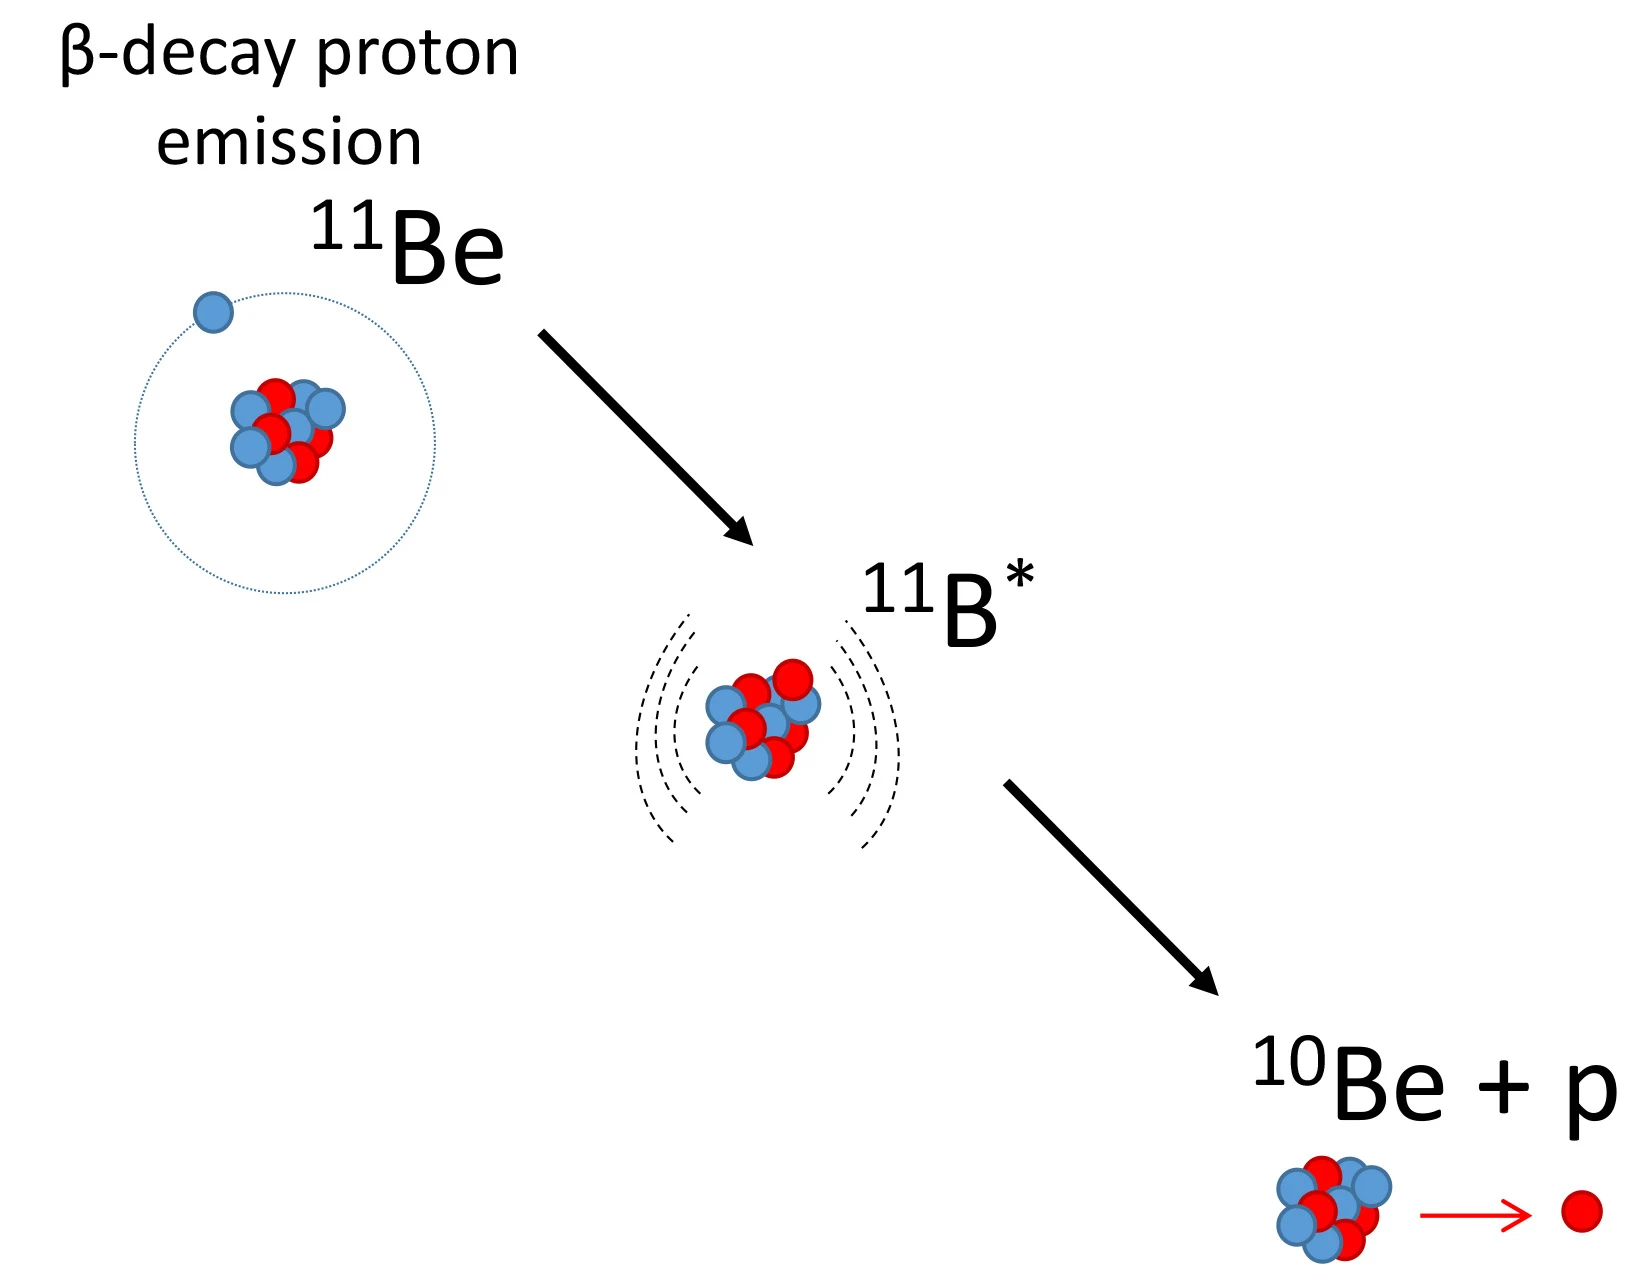 Three nuclei are shown as collections of blue orbs (neutrons) and red orbs (protons).  A diagram shows the beryllium-11 nucleus with 10 protons and neutrons orbited by a single neutron, forming a halo nucleus.  This nucleus undergoes proton emission by beta decay, first becoming boron-11 (shown in an excited state denoted 11B*), then beryllium-10 plus a proton. 